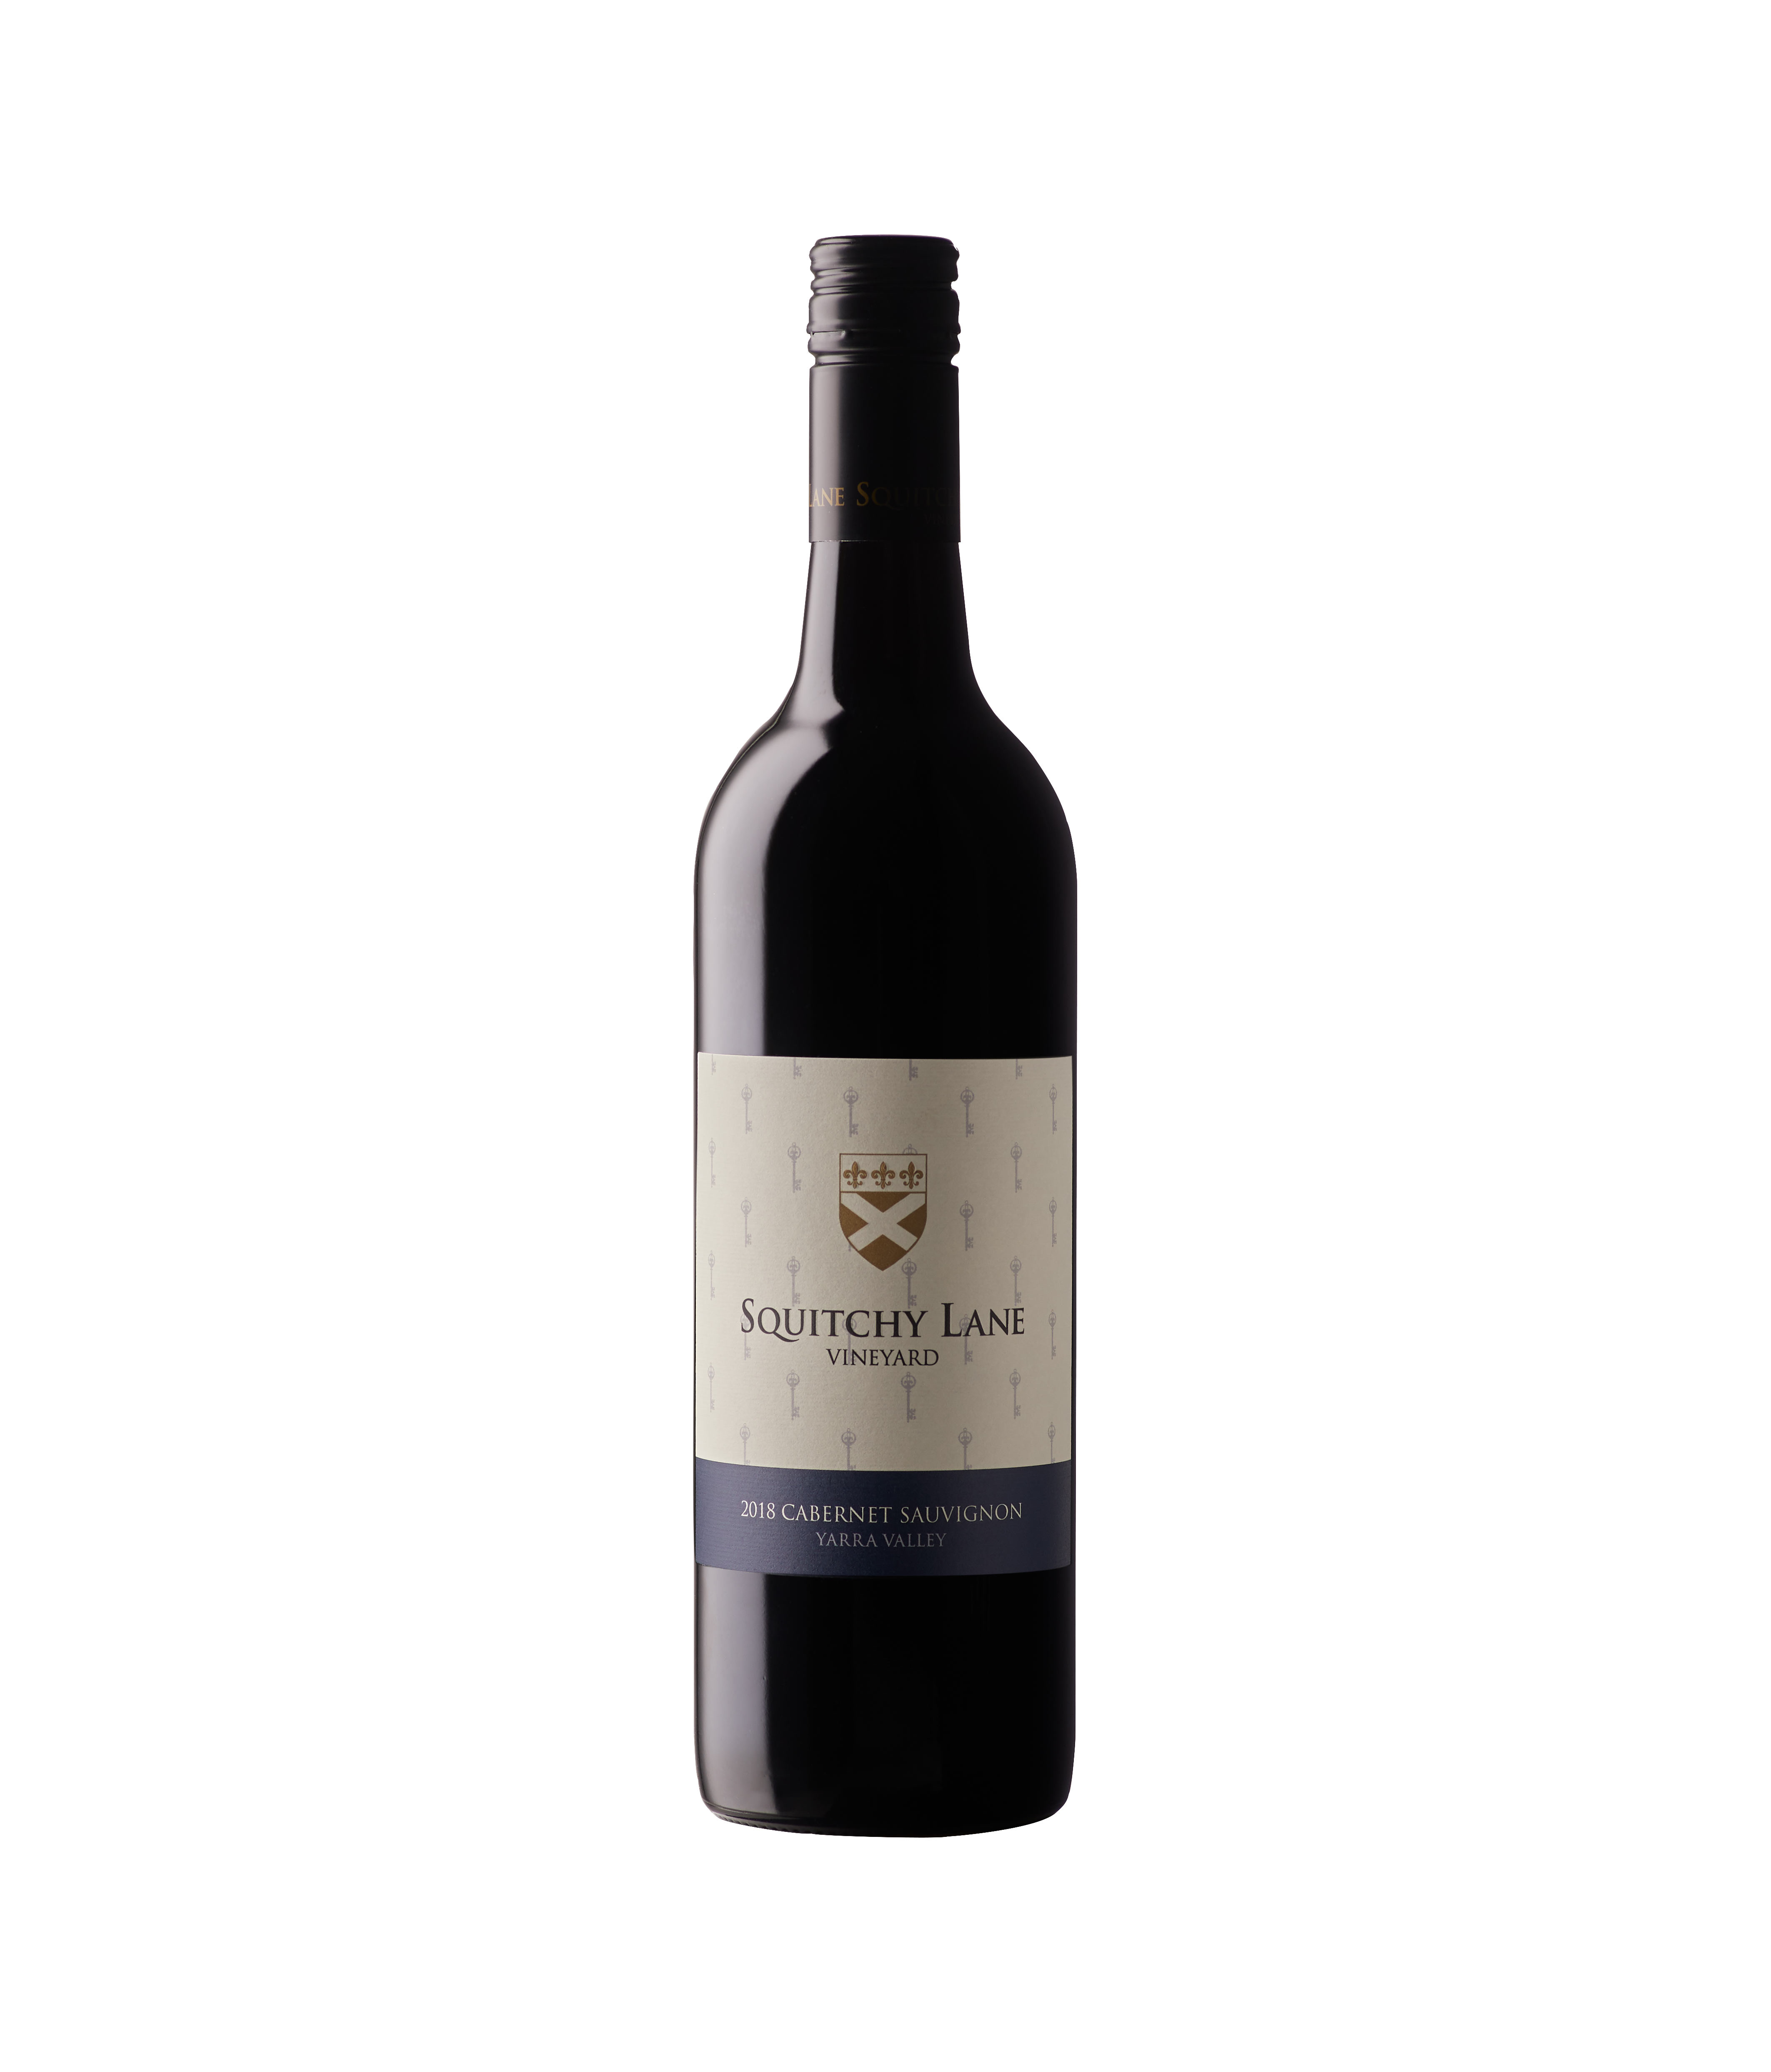 2019 - 2018 Cabernet Sauvignon steals the show at the Yarra Valley Wine Show, winning 4 trophies including;

Best Cabernet Sauvignon
Best Red Wine
Best Single Estate Wine
Champion Wine of Show

